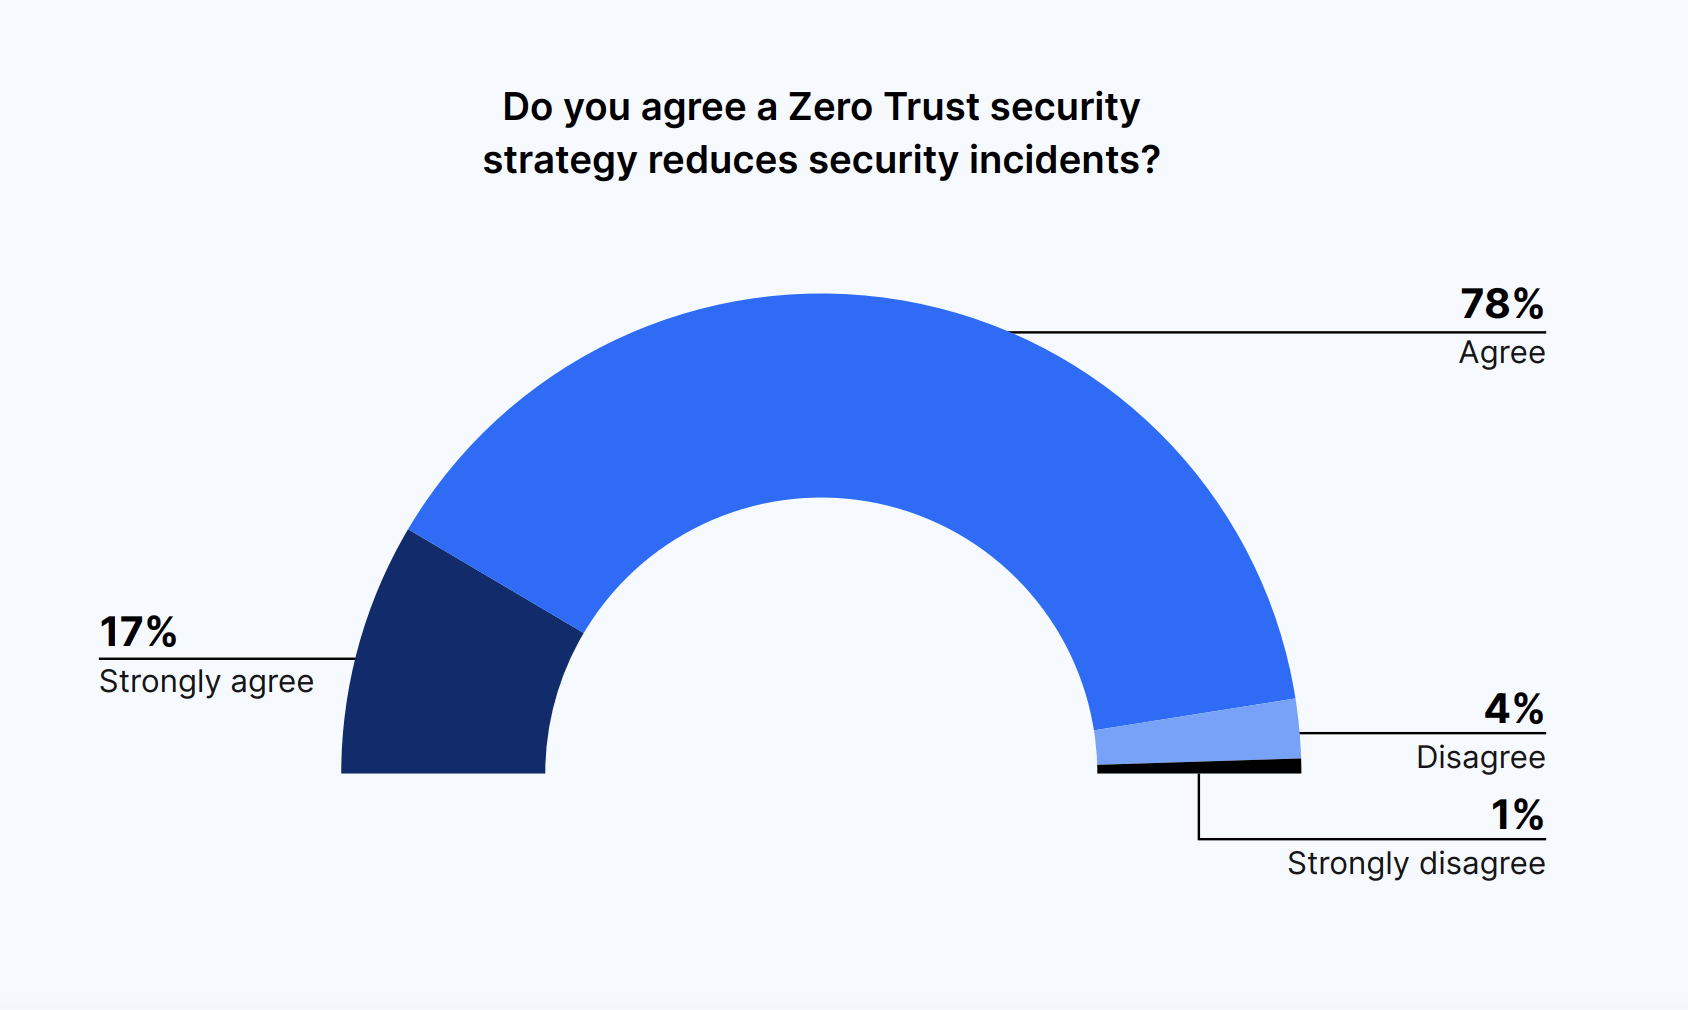 Do you agree a Zero Trust security strategy reduces security incidents?